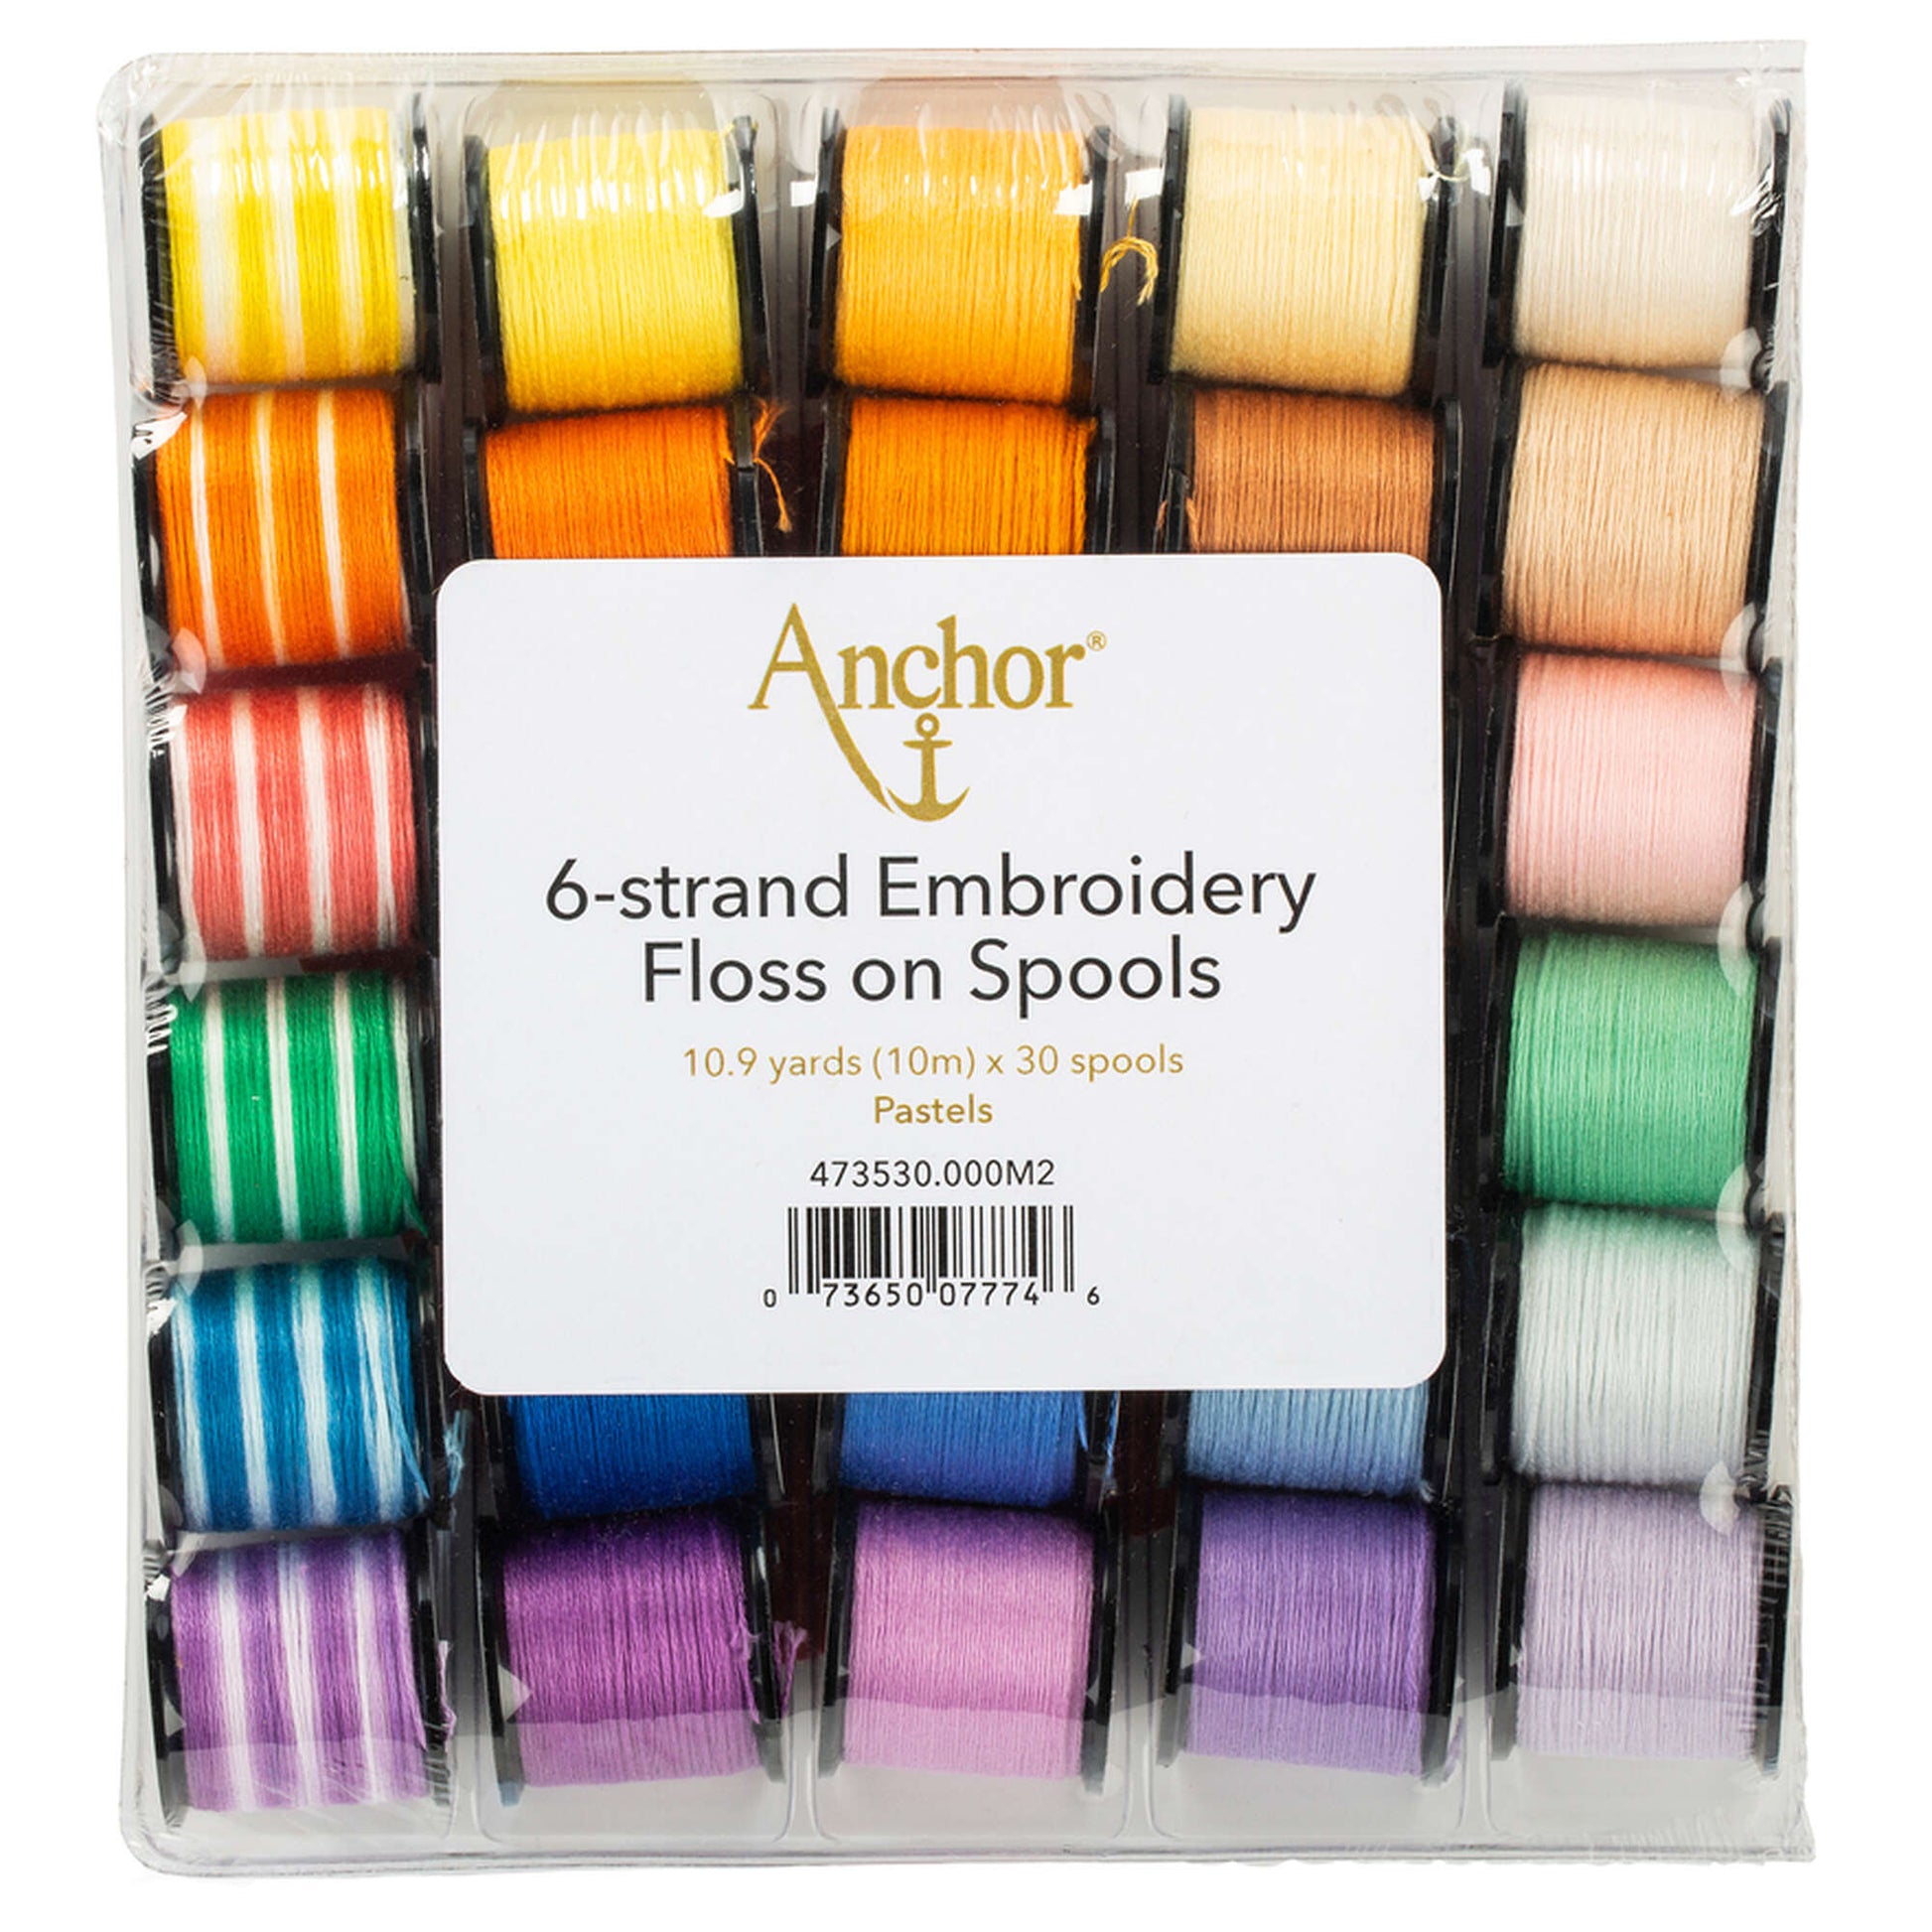 Anchor Embroidery Floss on Spools, 30 Pack